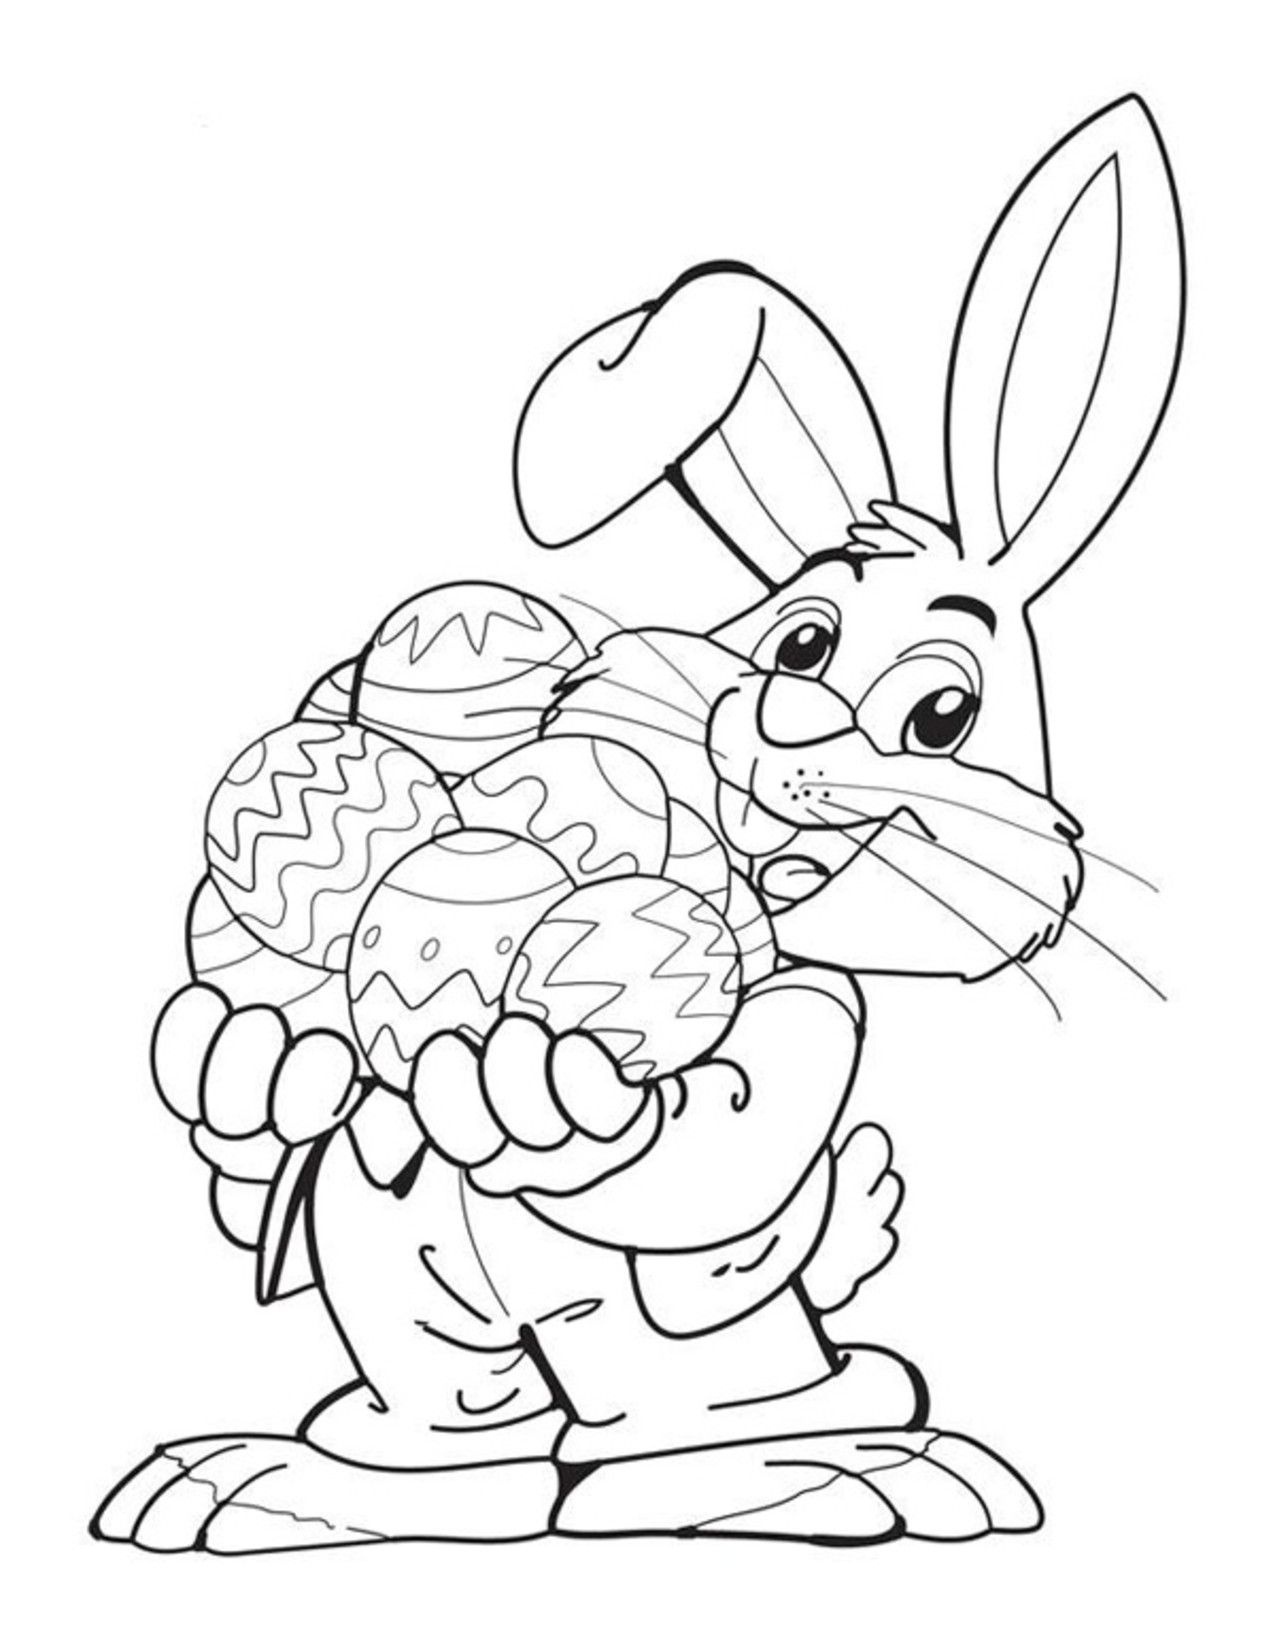 Printable Easter Coloring Pages For Preschoolers Adults Mandala - Easter Color Pages Free Printable